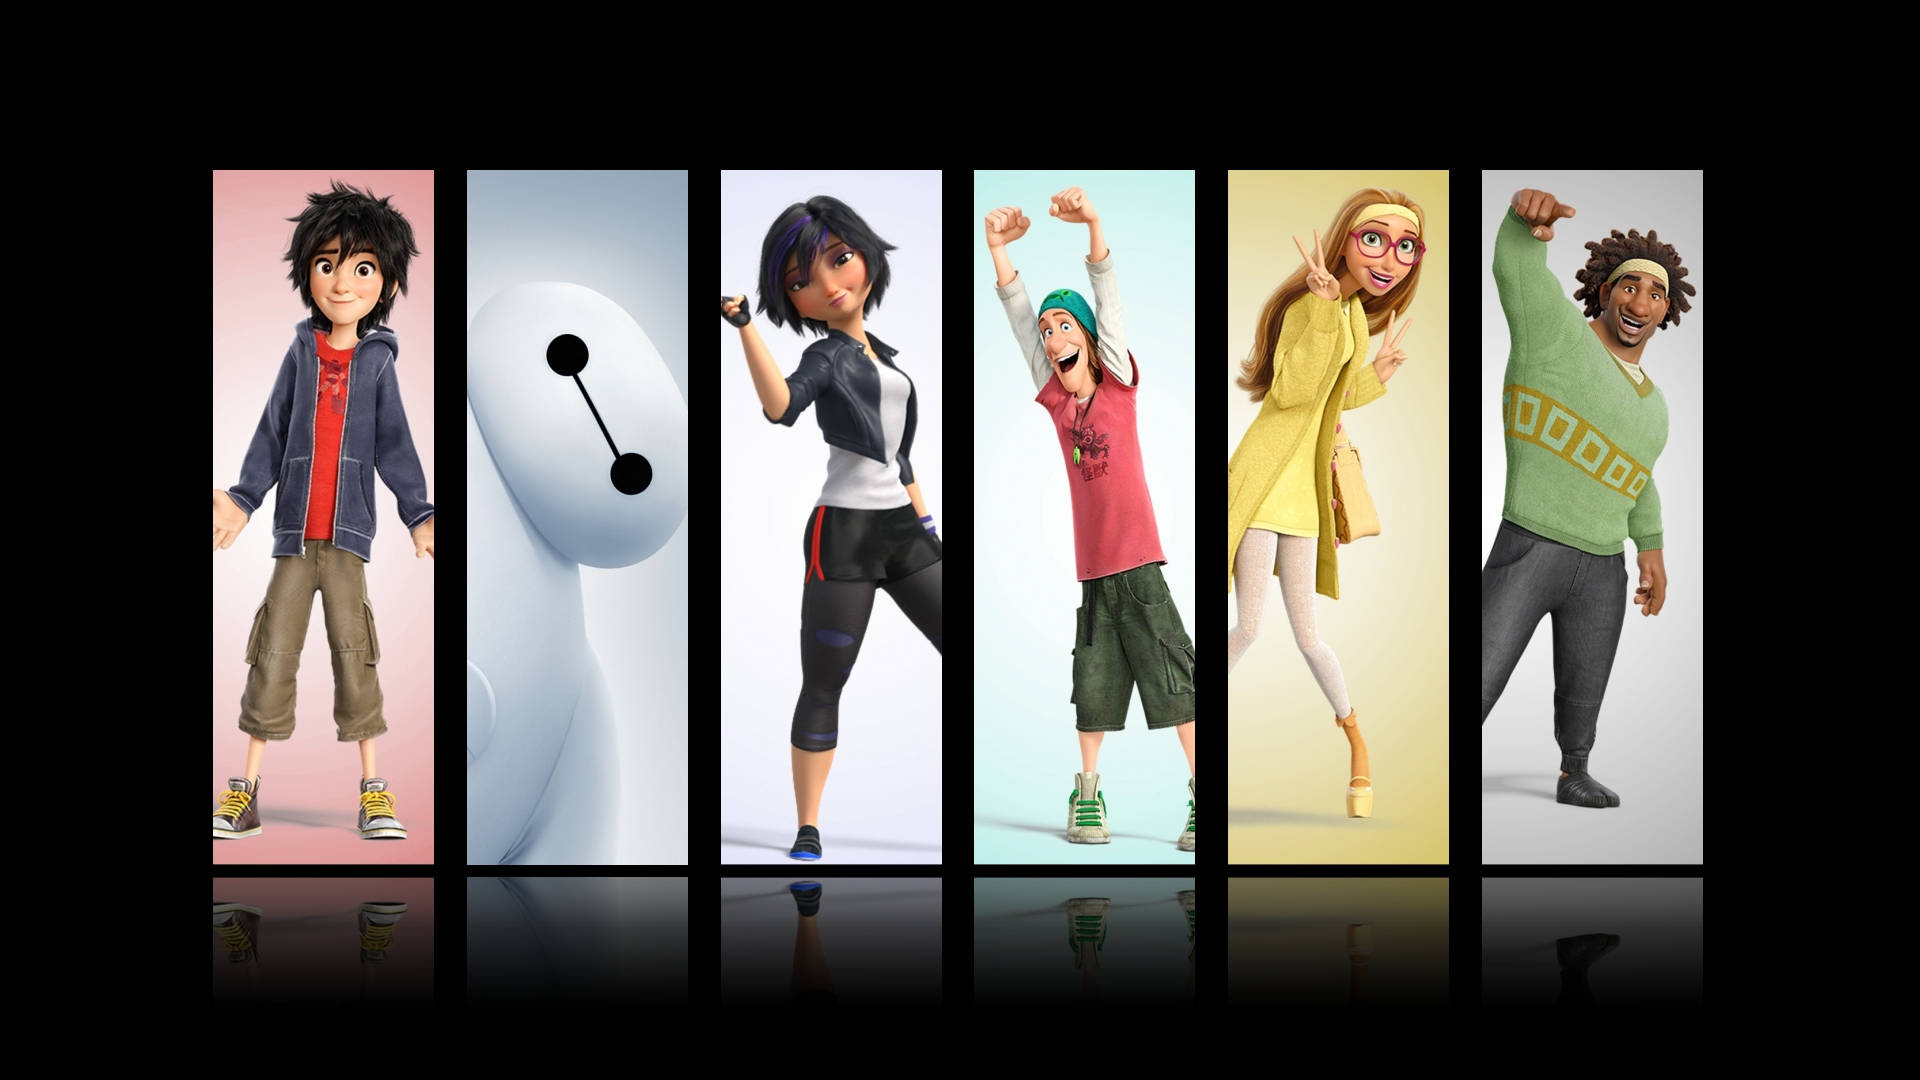 "Characters From Big Hero 6 Animated Movie" Wallpaper